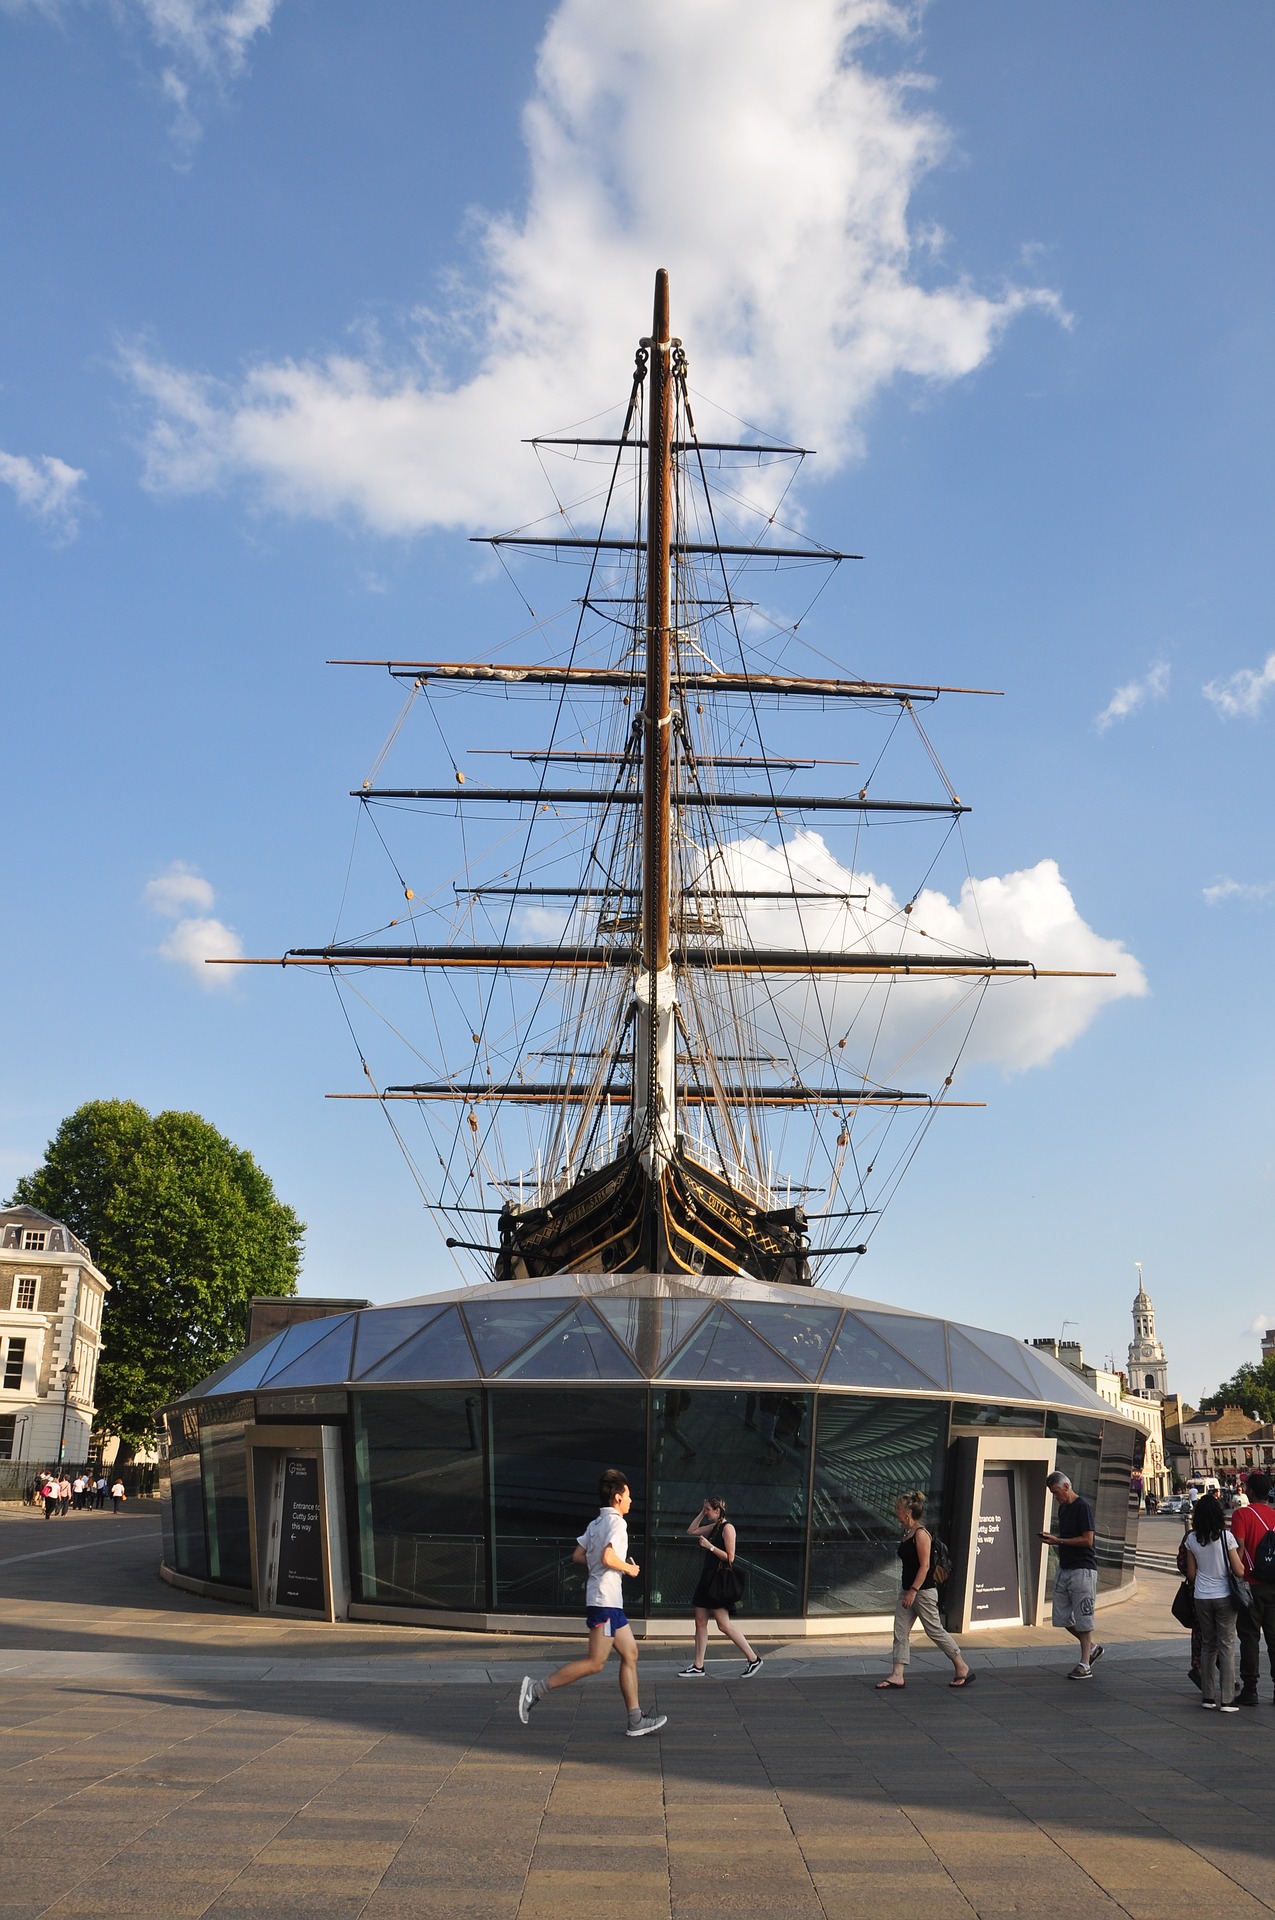 The Cutty Sark In Greenwich London The World S Sole Surviving Tea Clipper Roaming Required